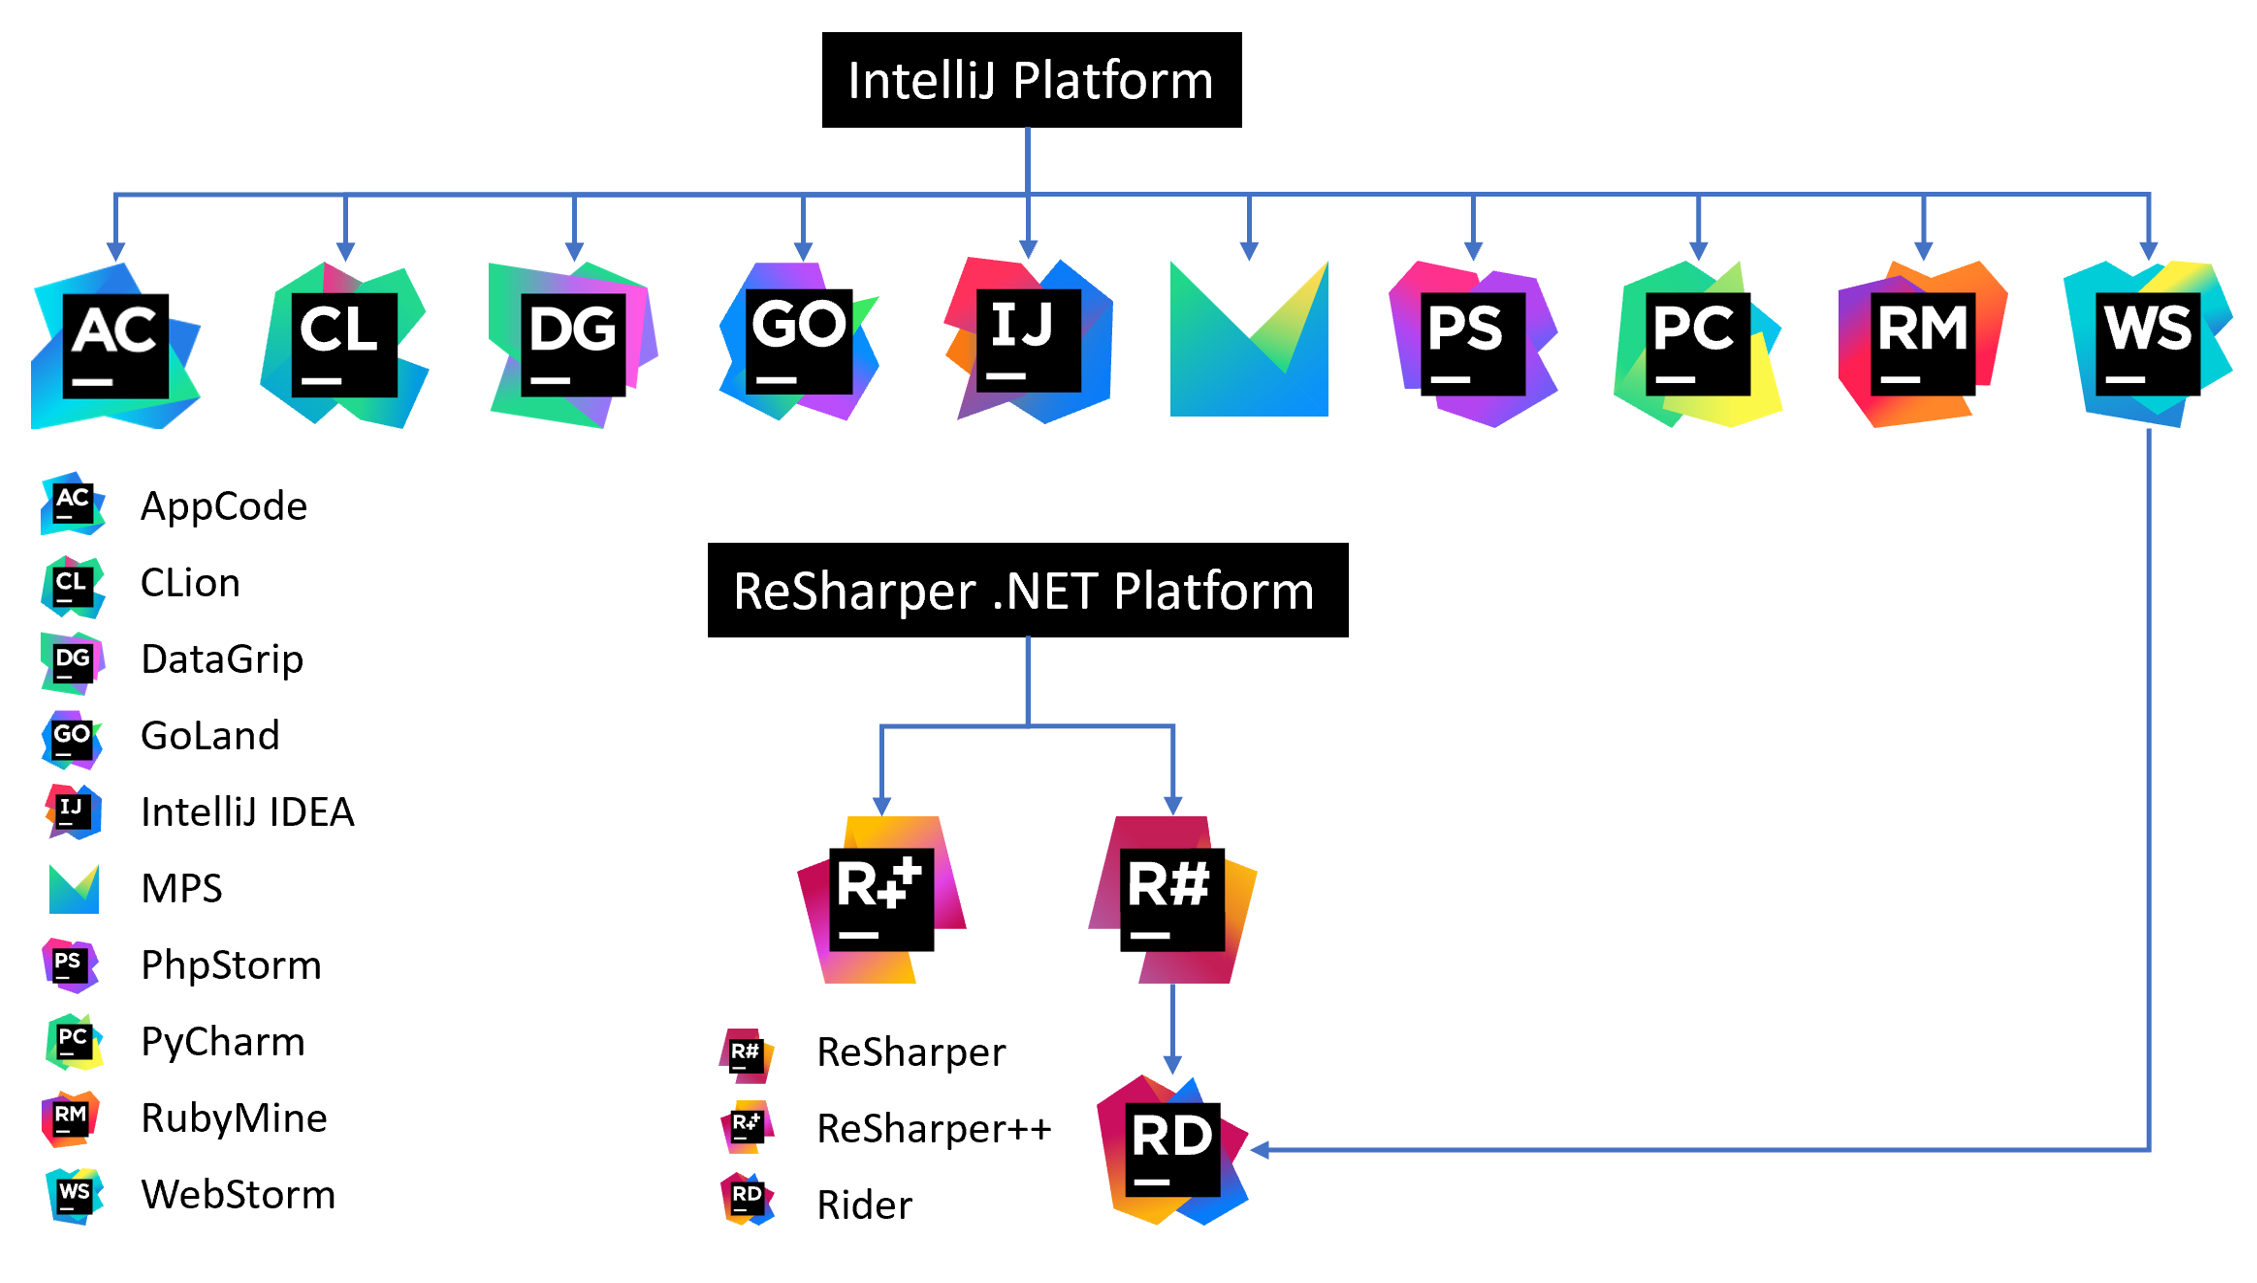 The IntelliJ and ReSharper product lines